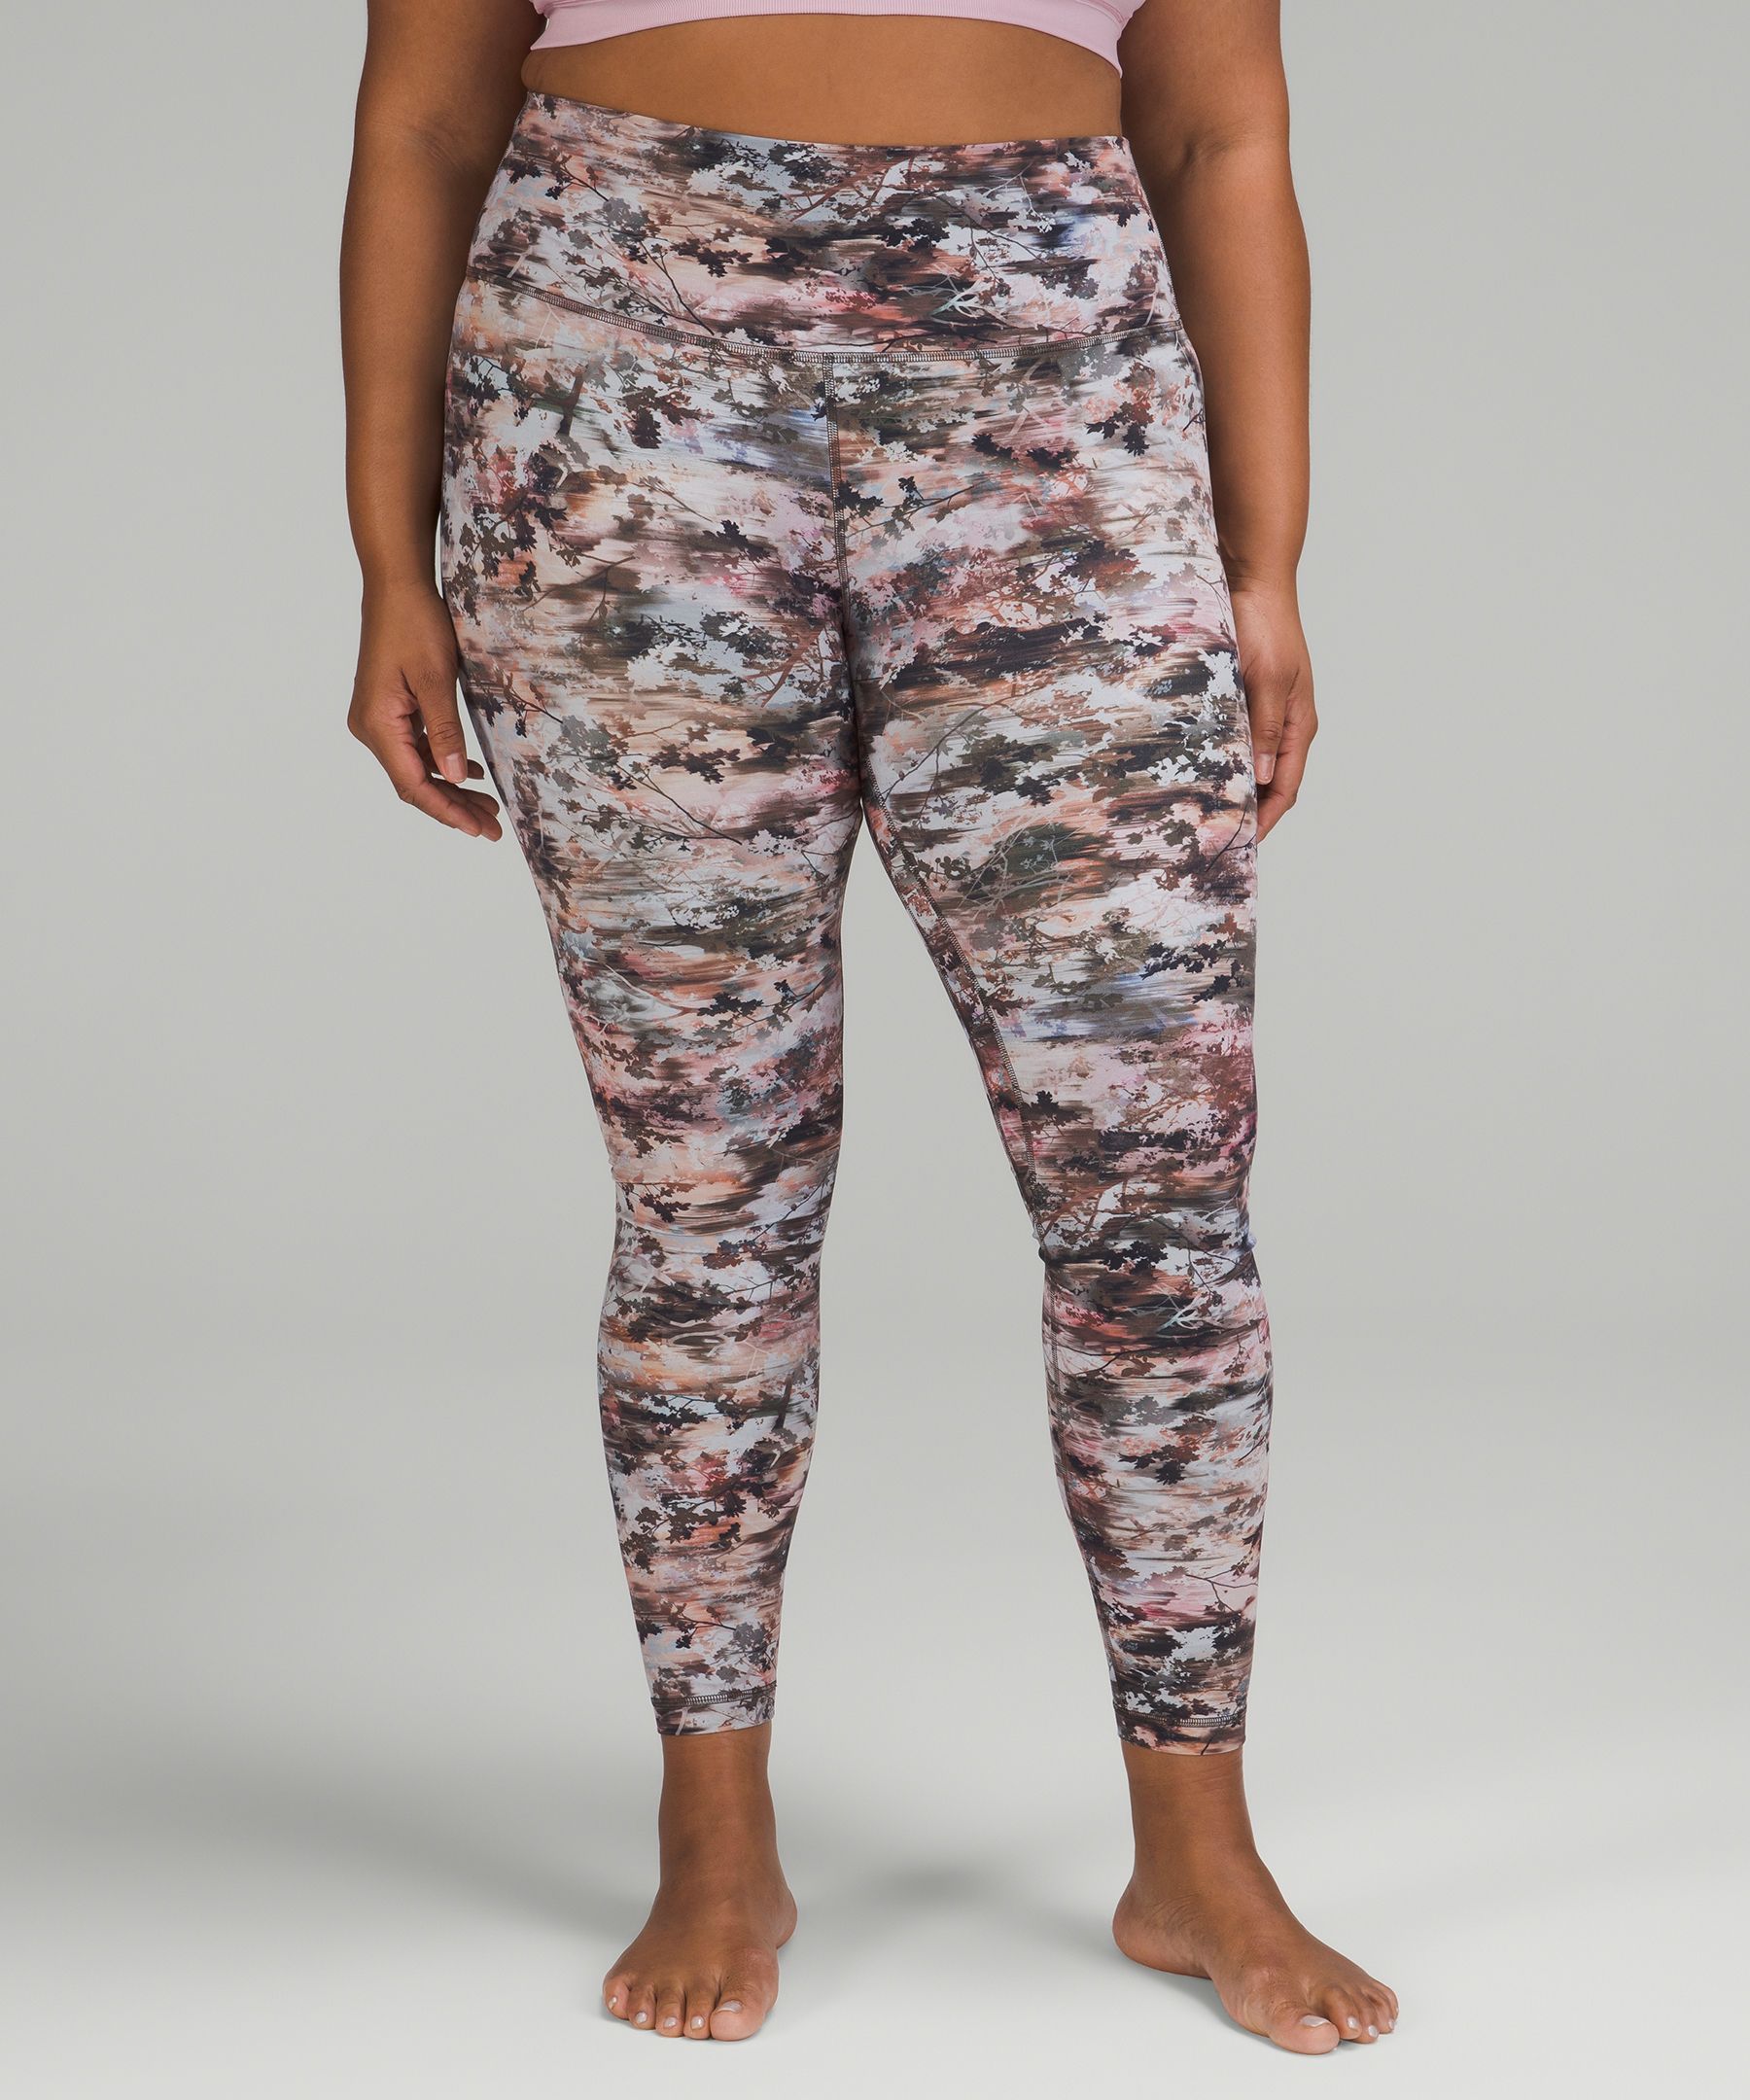 Lululemon White/Grey Leaf Print Vented Leggings- Size 4 (Inseam 23.5) –  The Saved Collection